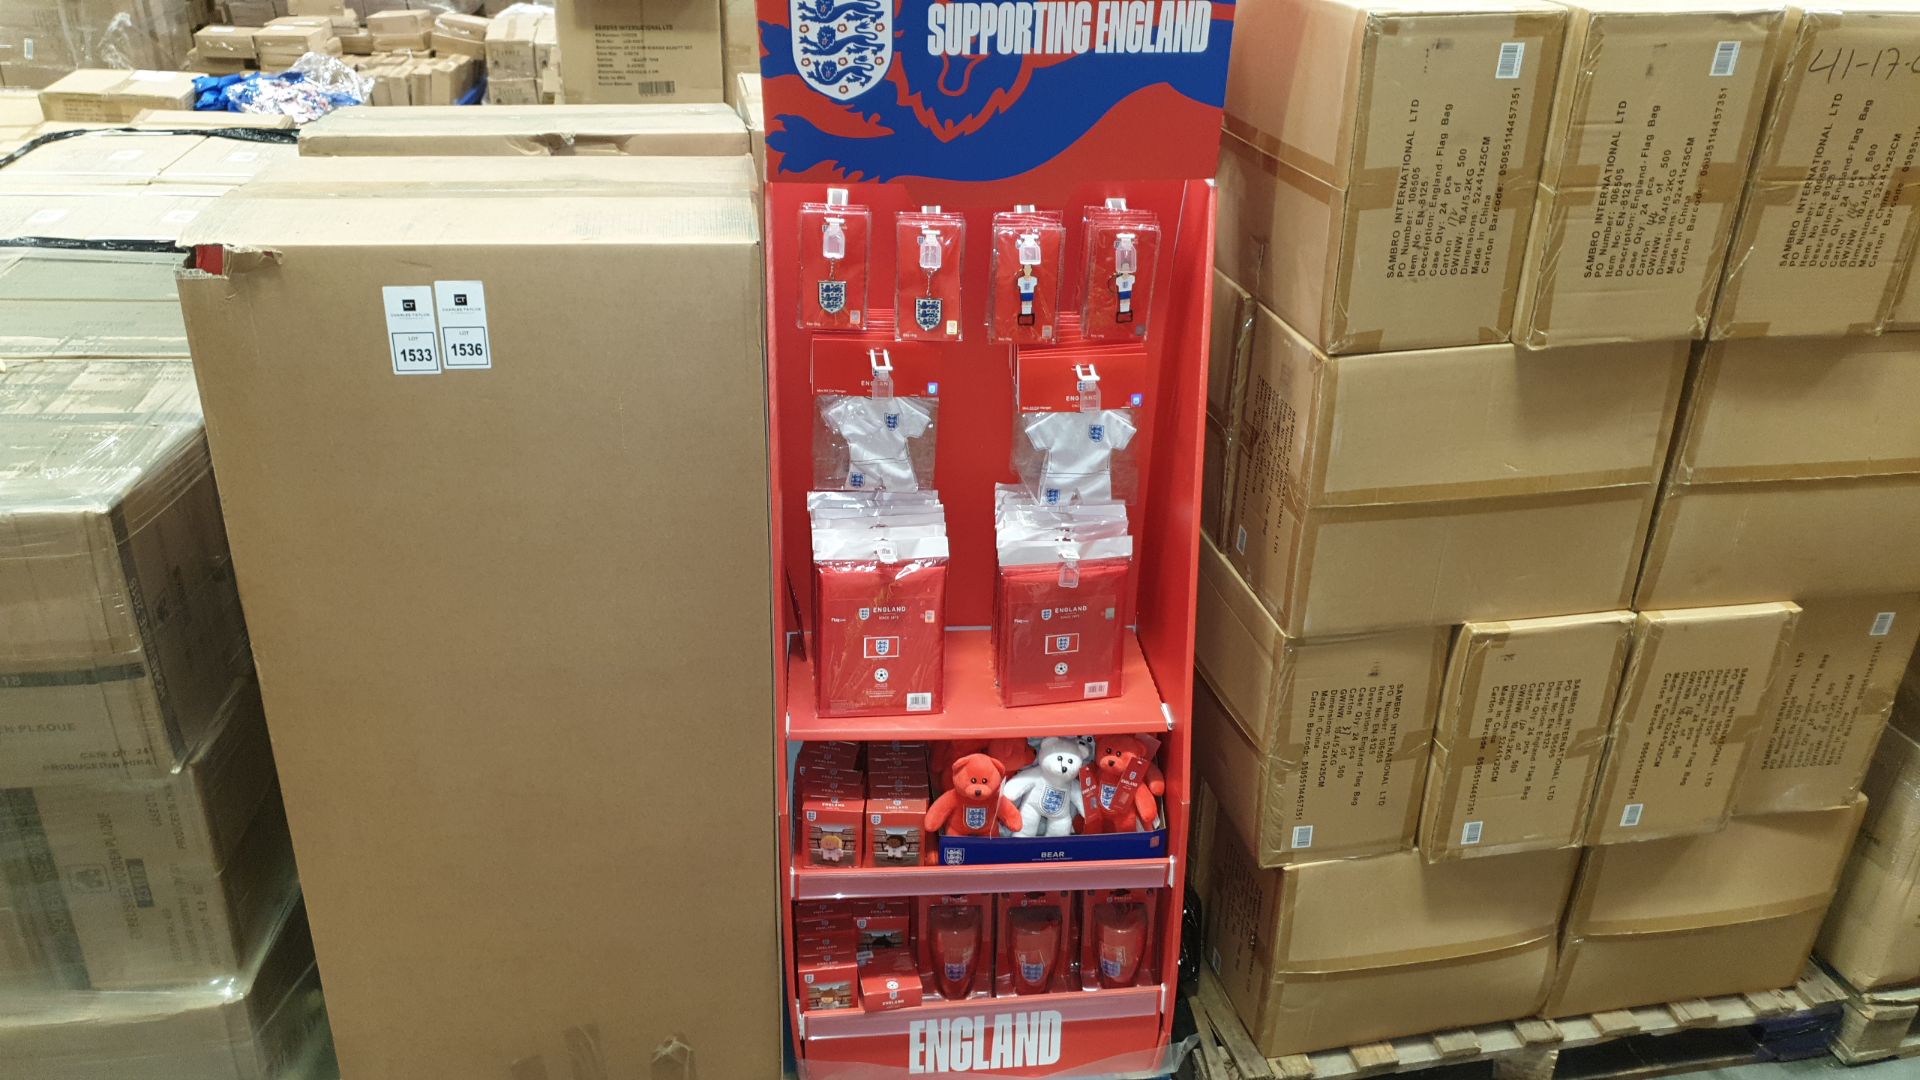 BRAND NEW 'SUPPORTING ENGLAND' DISPLAY STAND IE. -MINI KIT CAR HANGERS, KEY RINGS, CONSTRUCTION